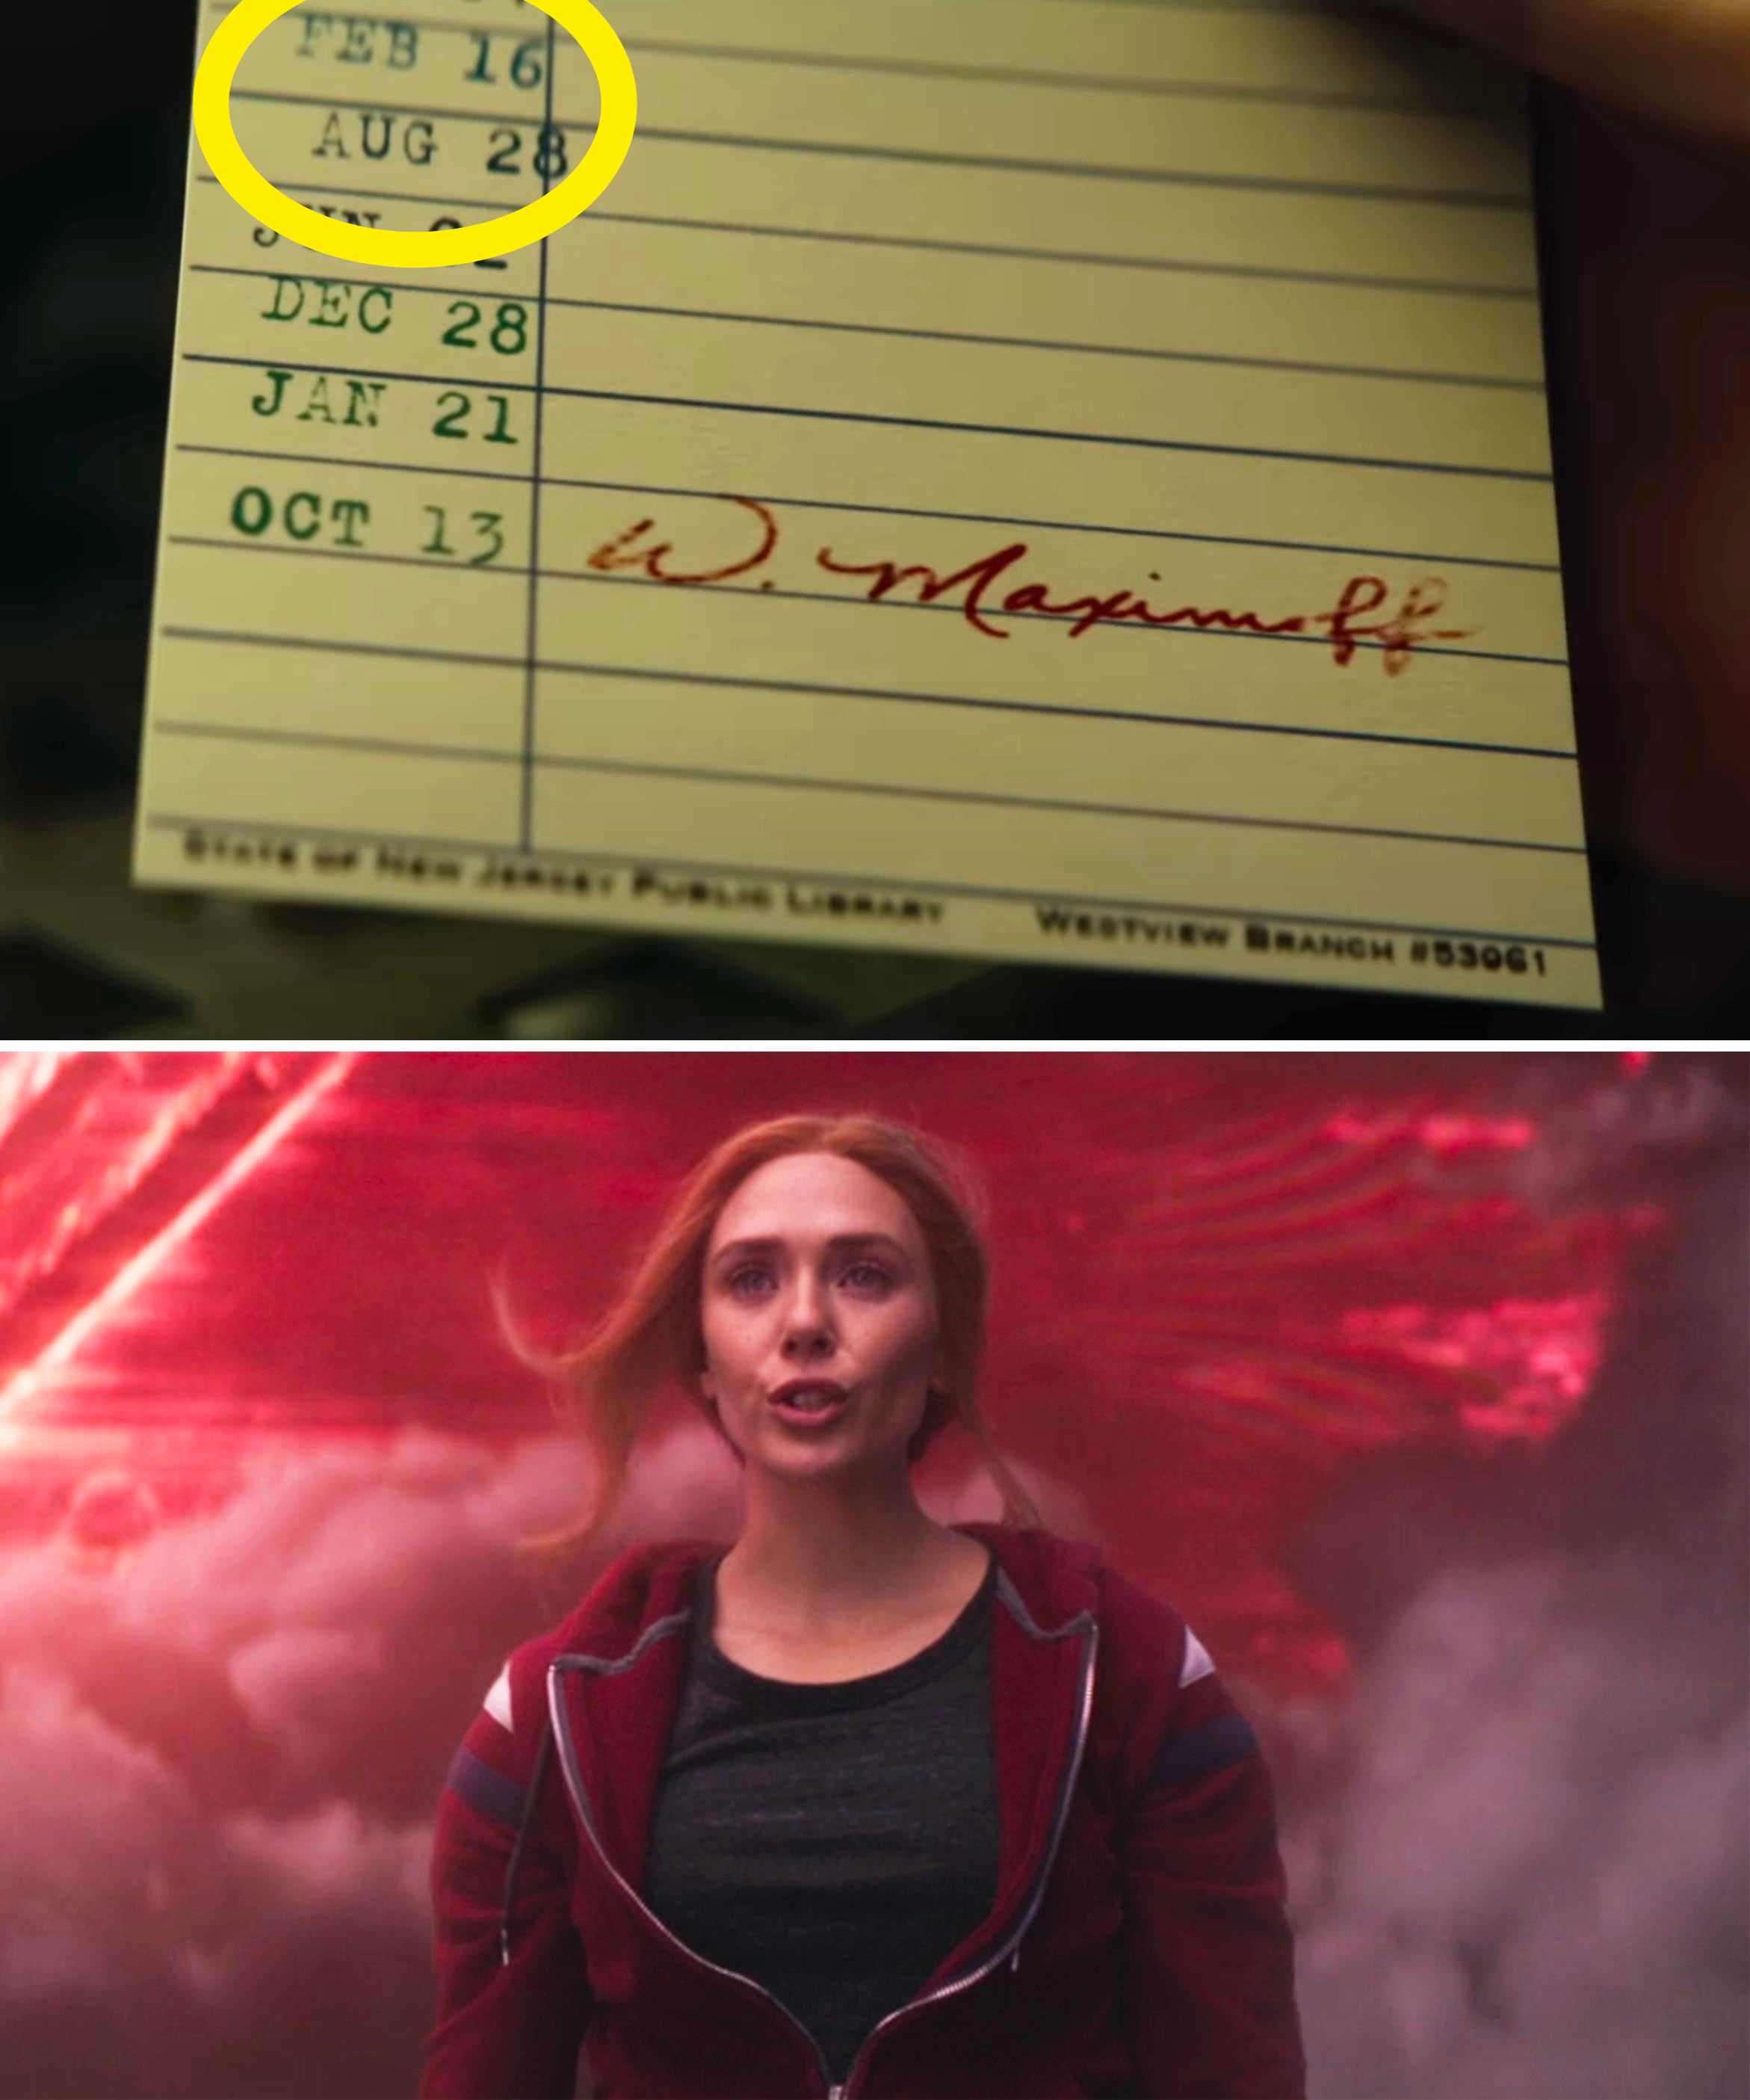 Top half: Library card with dates and &quot;W. Maximoff&quot; signature. Bottom half: Wanda Maximoff in a dramatic scene, wearing a jacket with a background of red energy